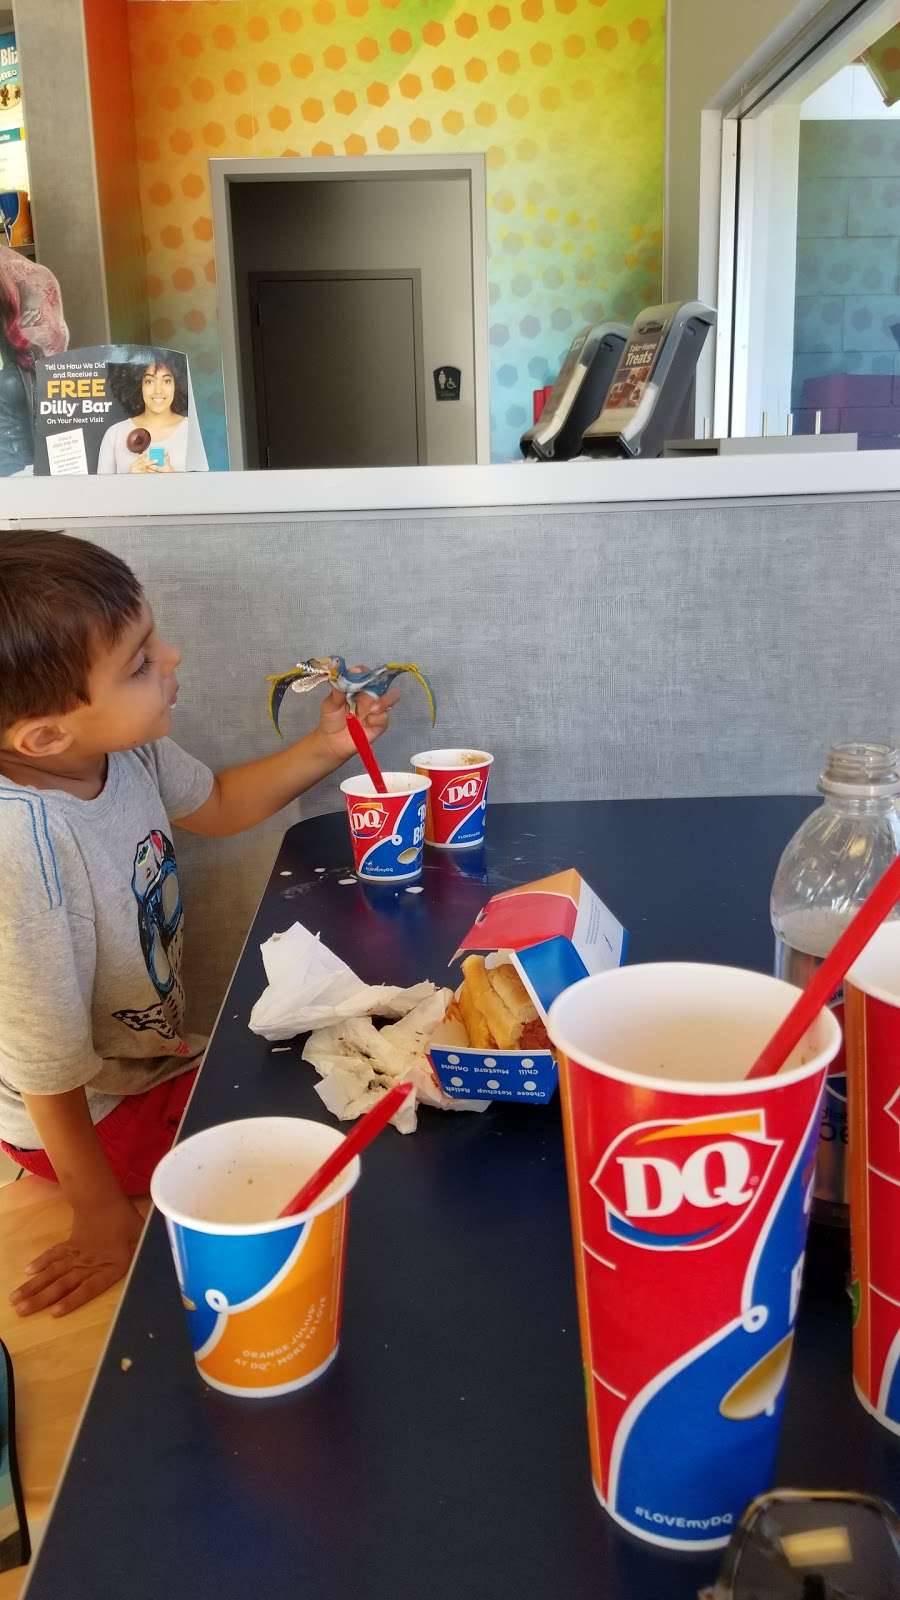 Dairy Queen (Treat) | 1010 S Union Blvd, Lakewood, CO 80228 | Phone: (303) 988-8545